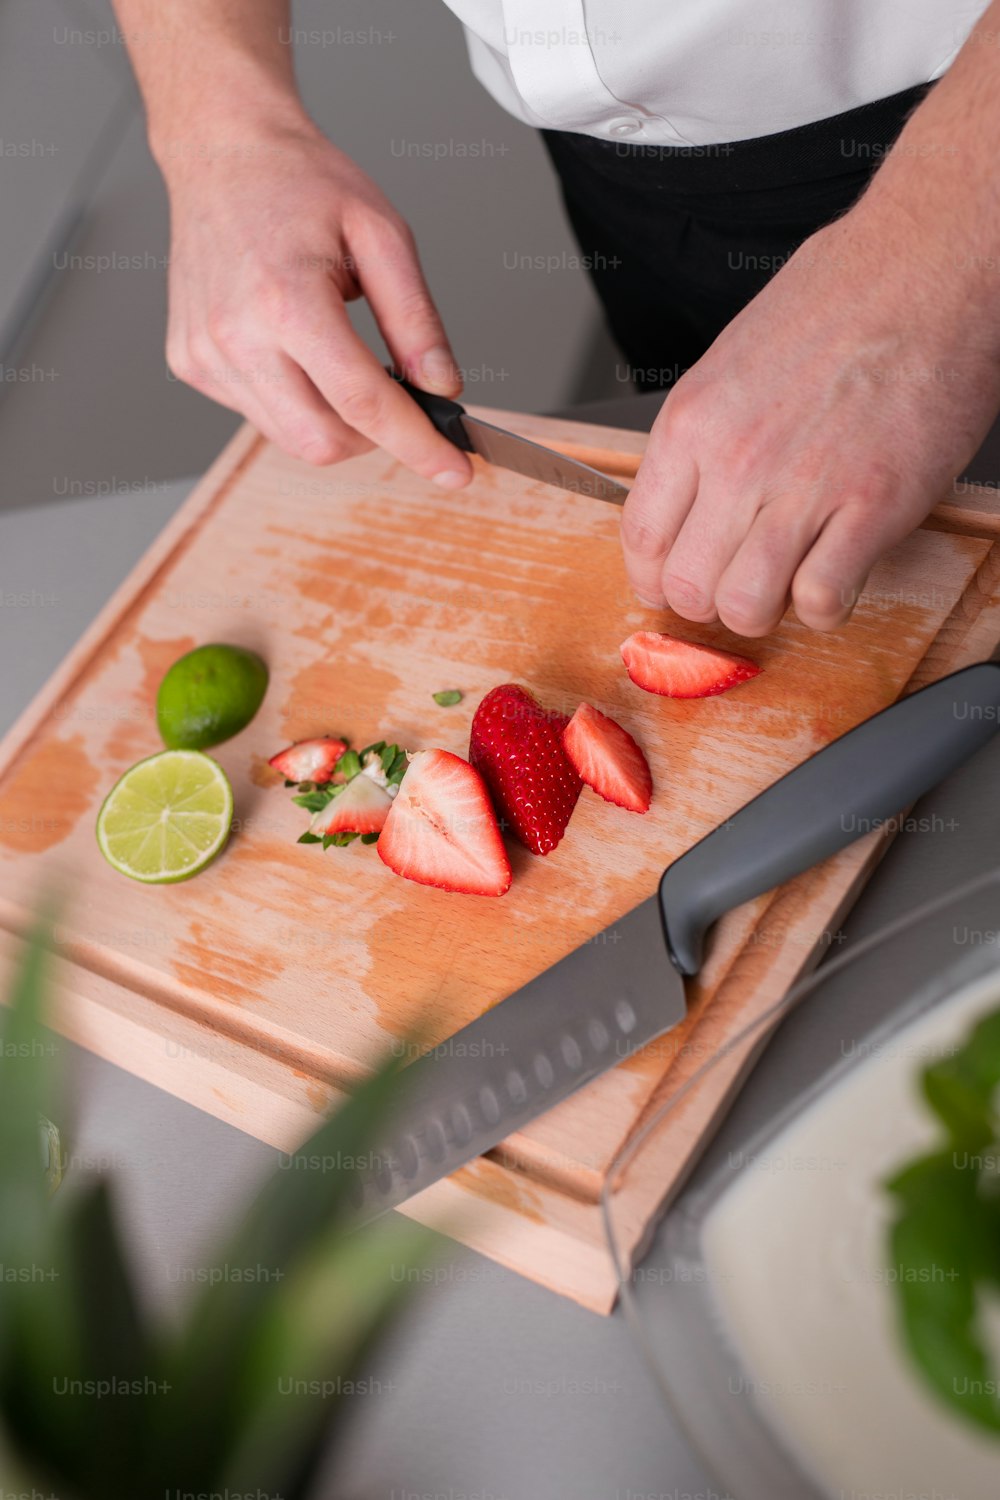 A man cutting strawberries and limes on chopping board.